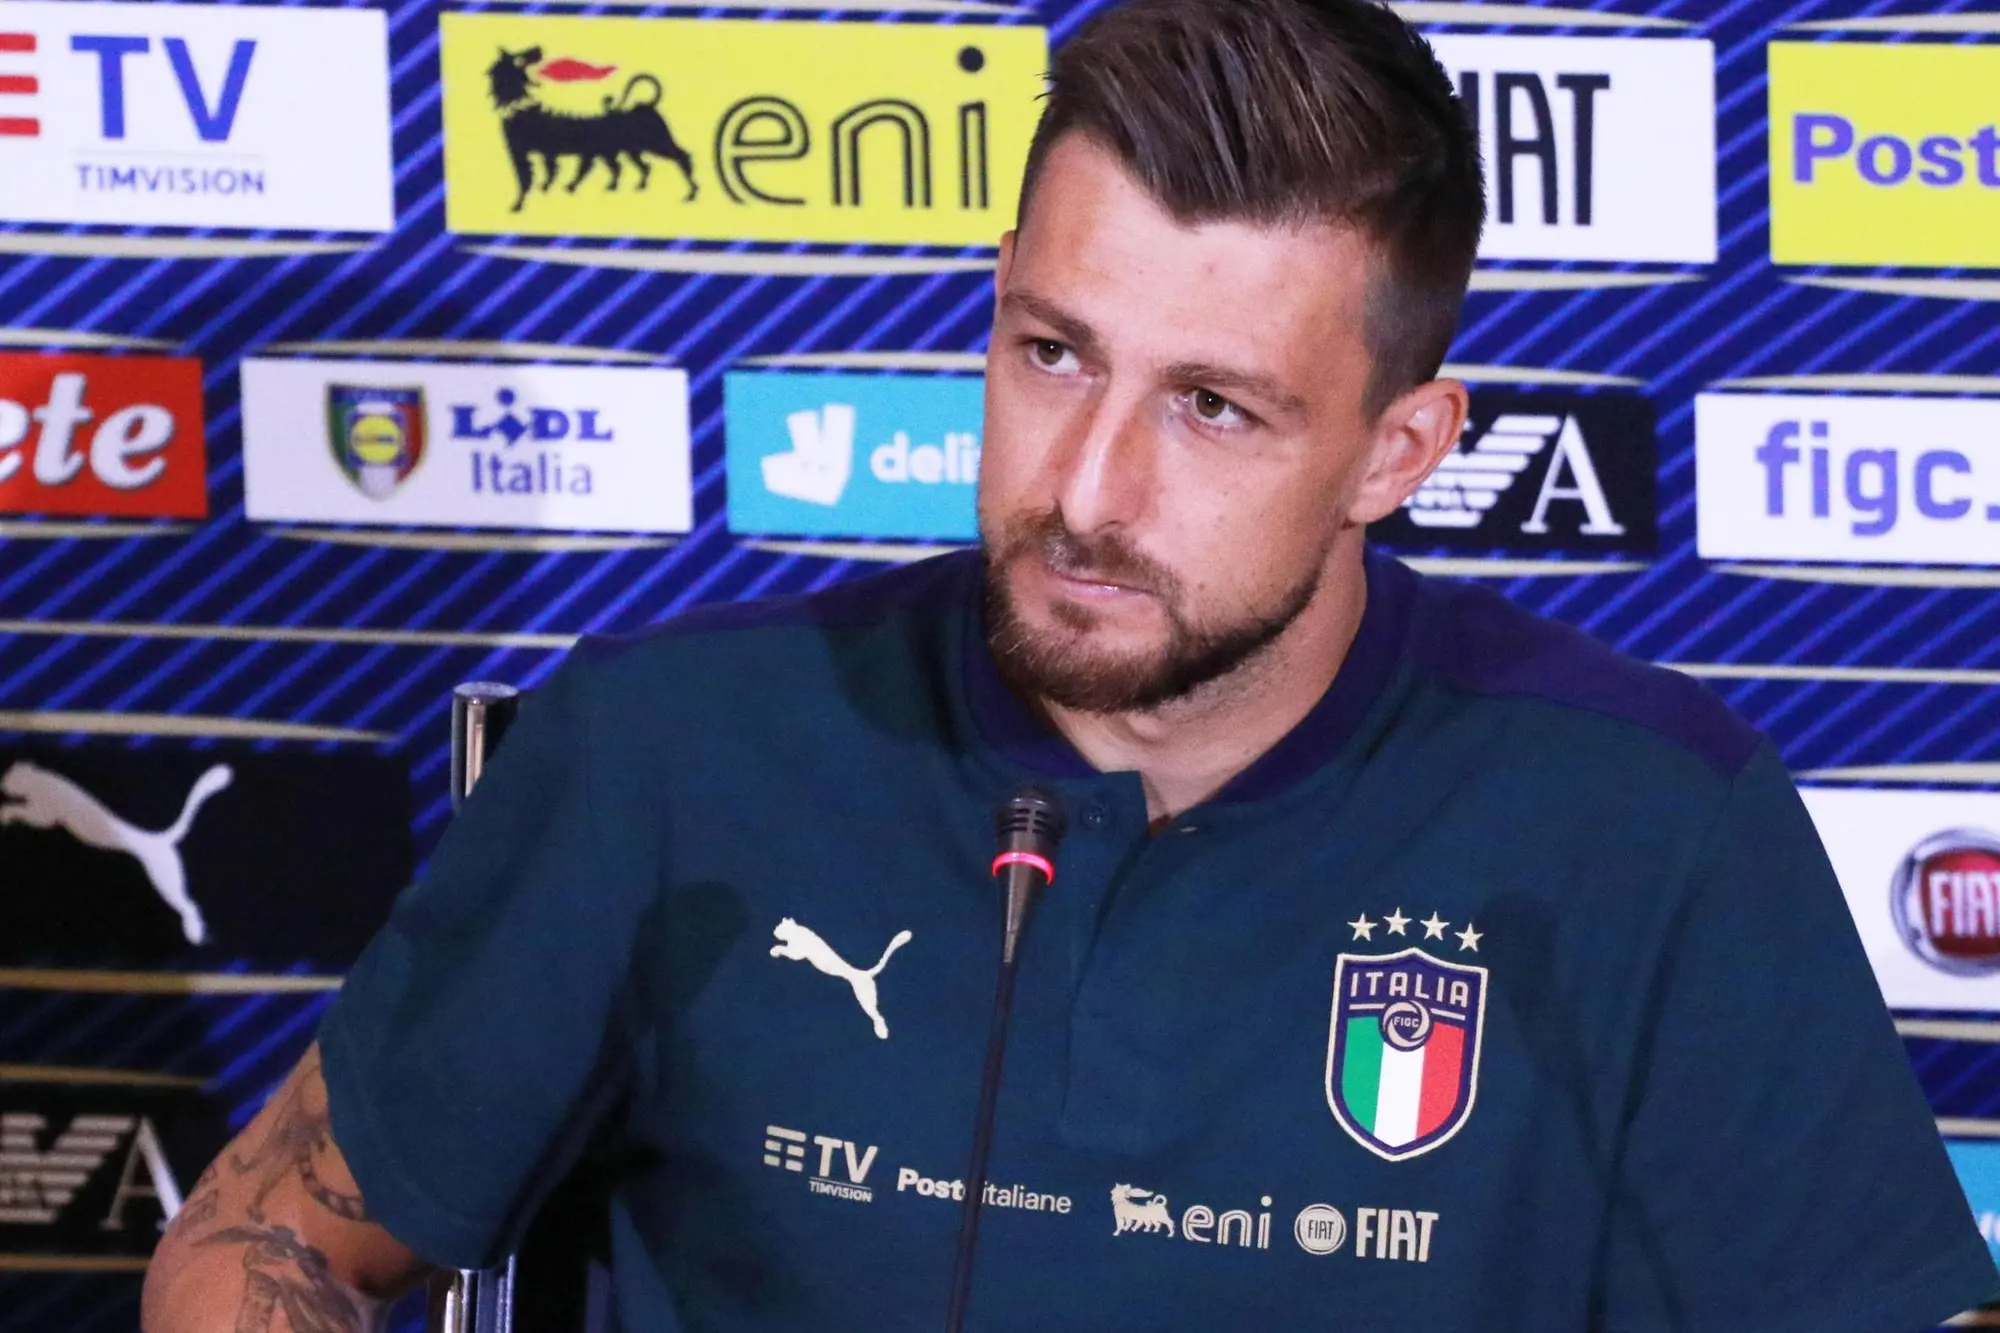 Italy's defender Francesco Acerbi speaks during a press conference at the Coverciano Sport Center in Florence, 09 October 2019. Italy will face Greece in its UEFA Euro 2020 qualifying match of group J on 12 October in Rome. ANSA/CLAUDIO GIOVANNINI